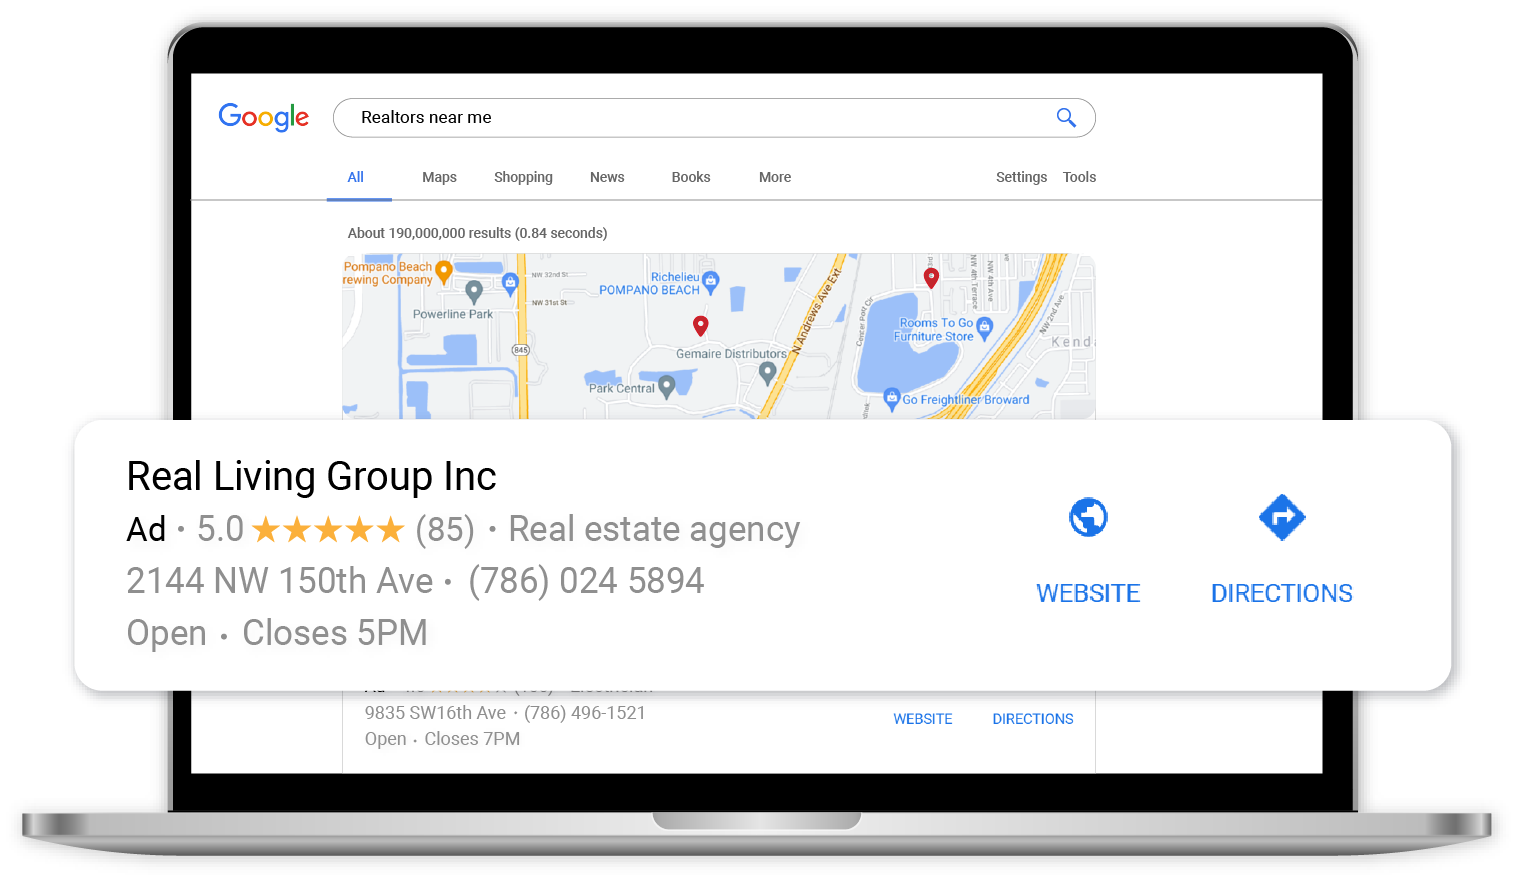 Google Ads for real estate agents